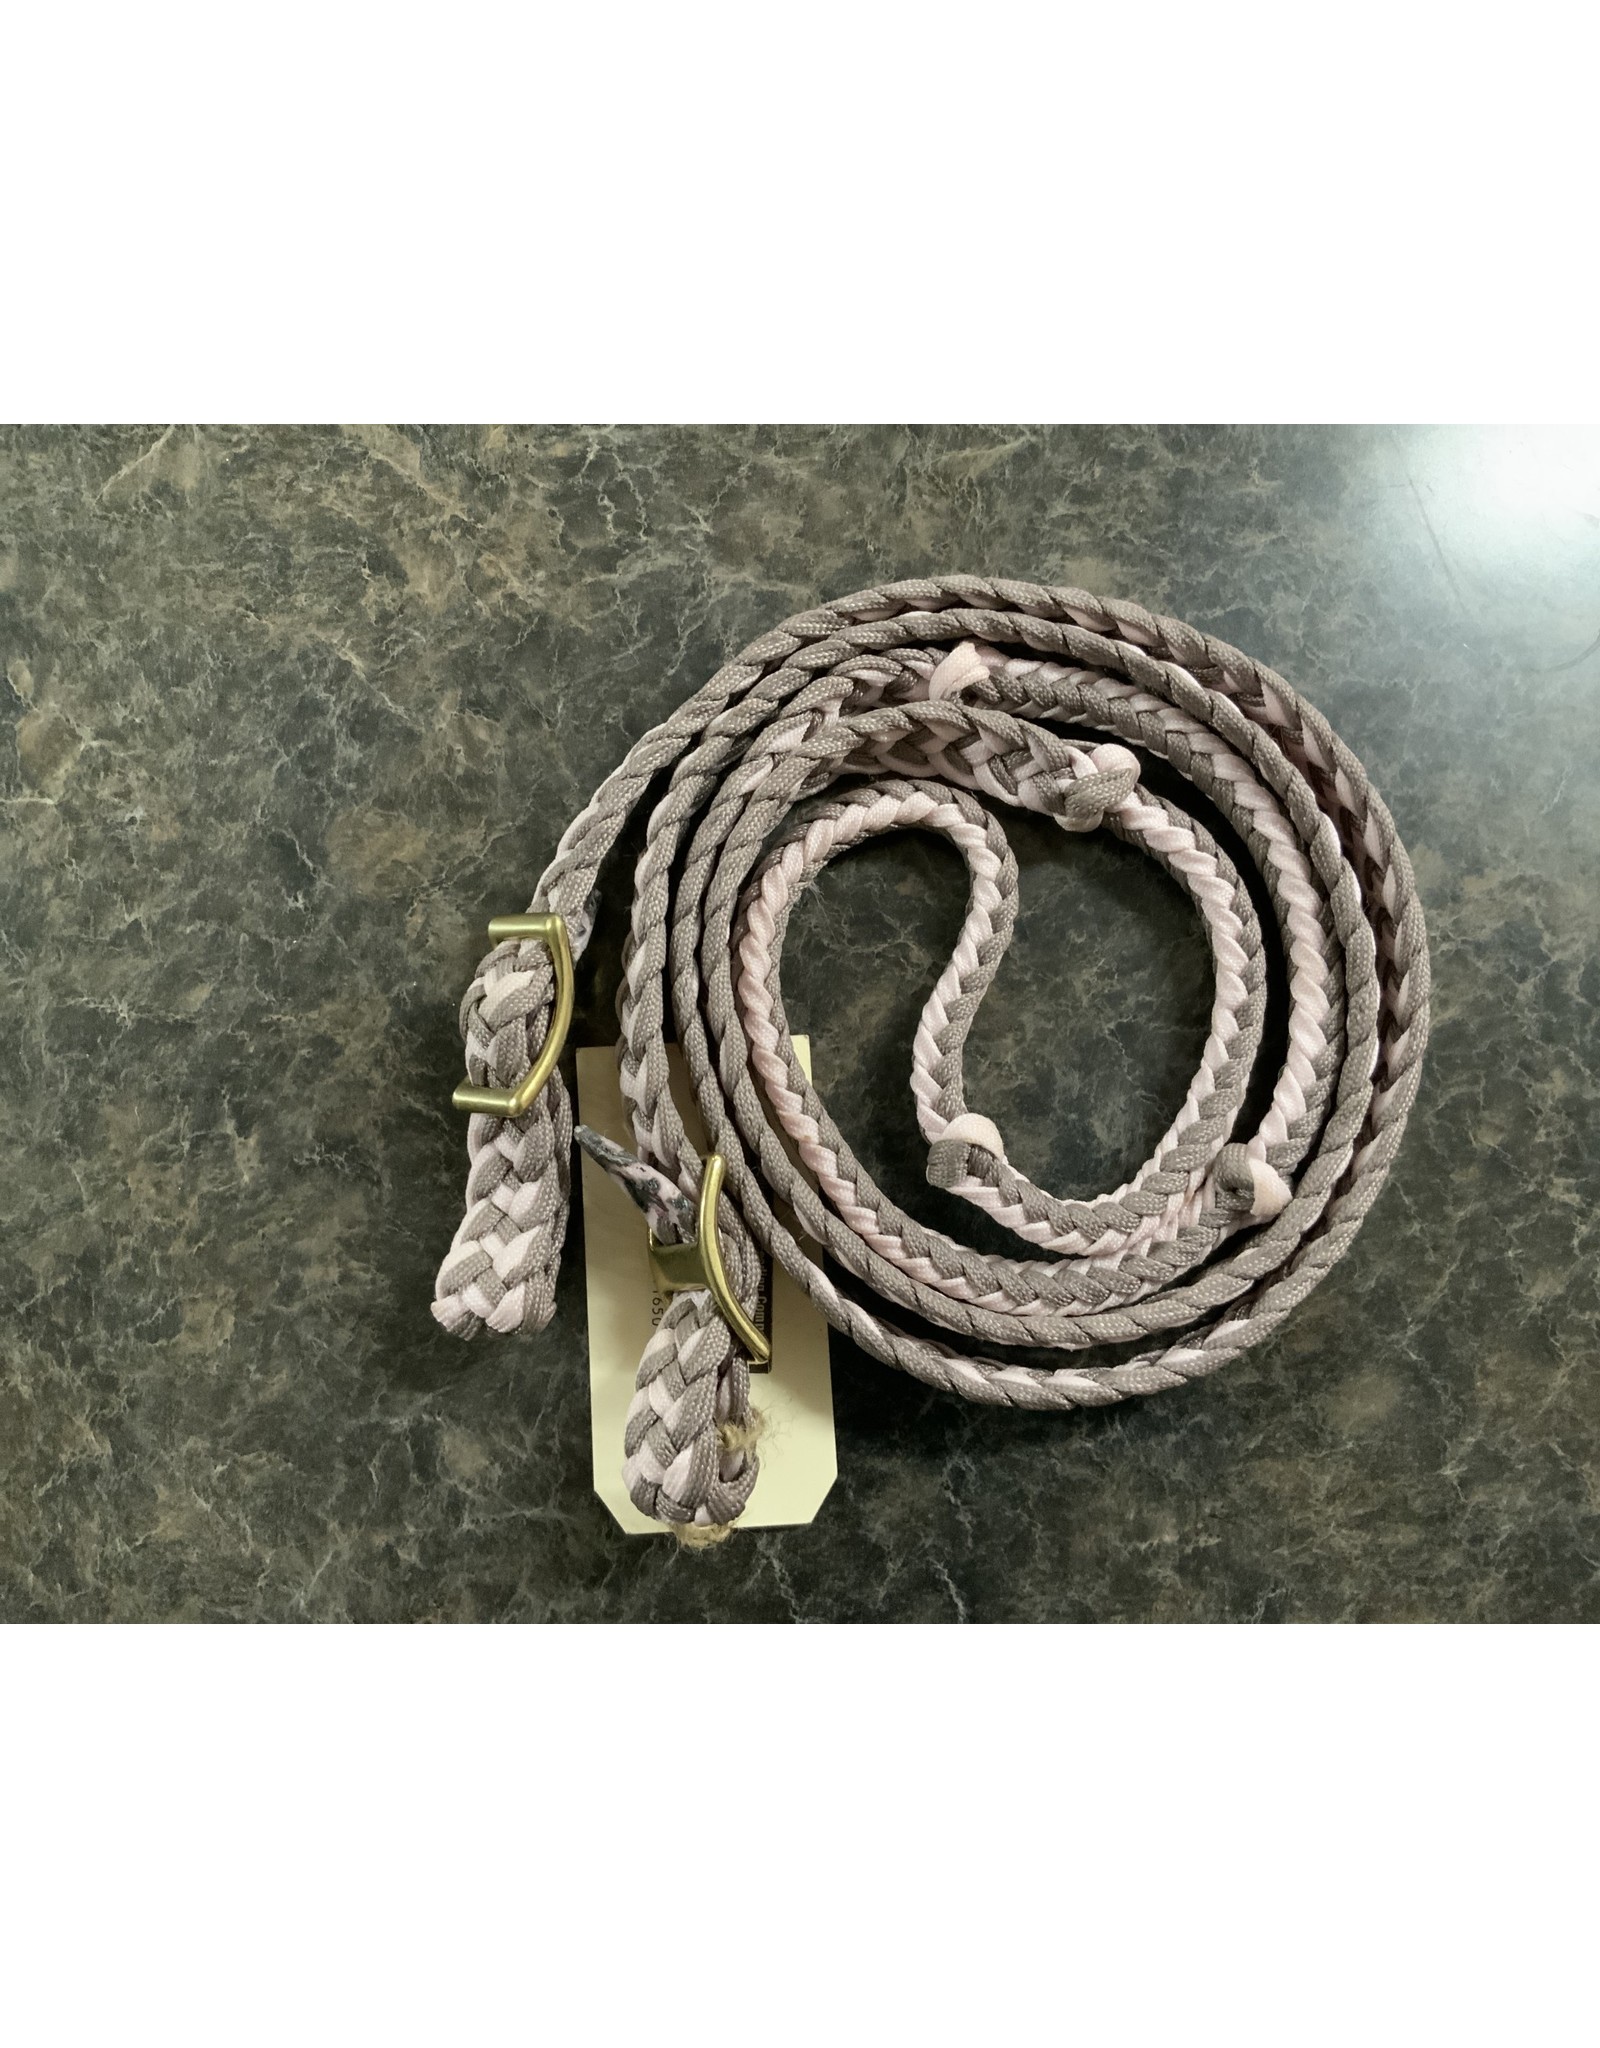 Braided Poly Knotted Roping Rein - Brown/Pink 2742 70